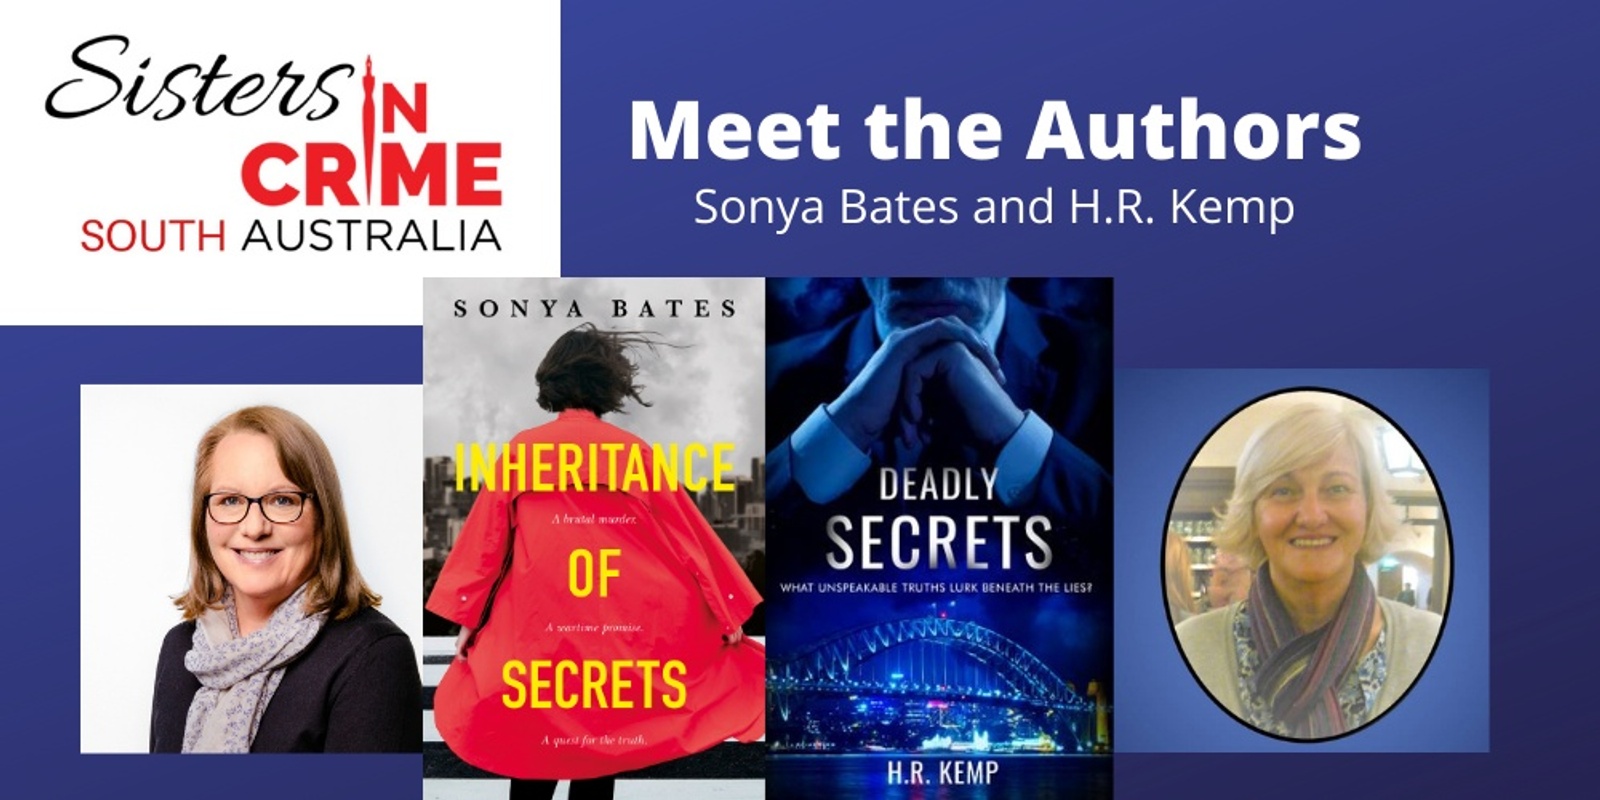 Sisters in Crime SA "Inheritance of Secrets and Deadly Secrets" - Meet the Authors